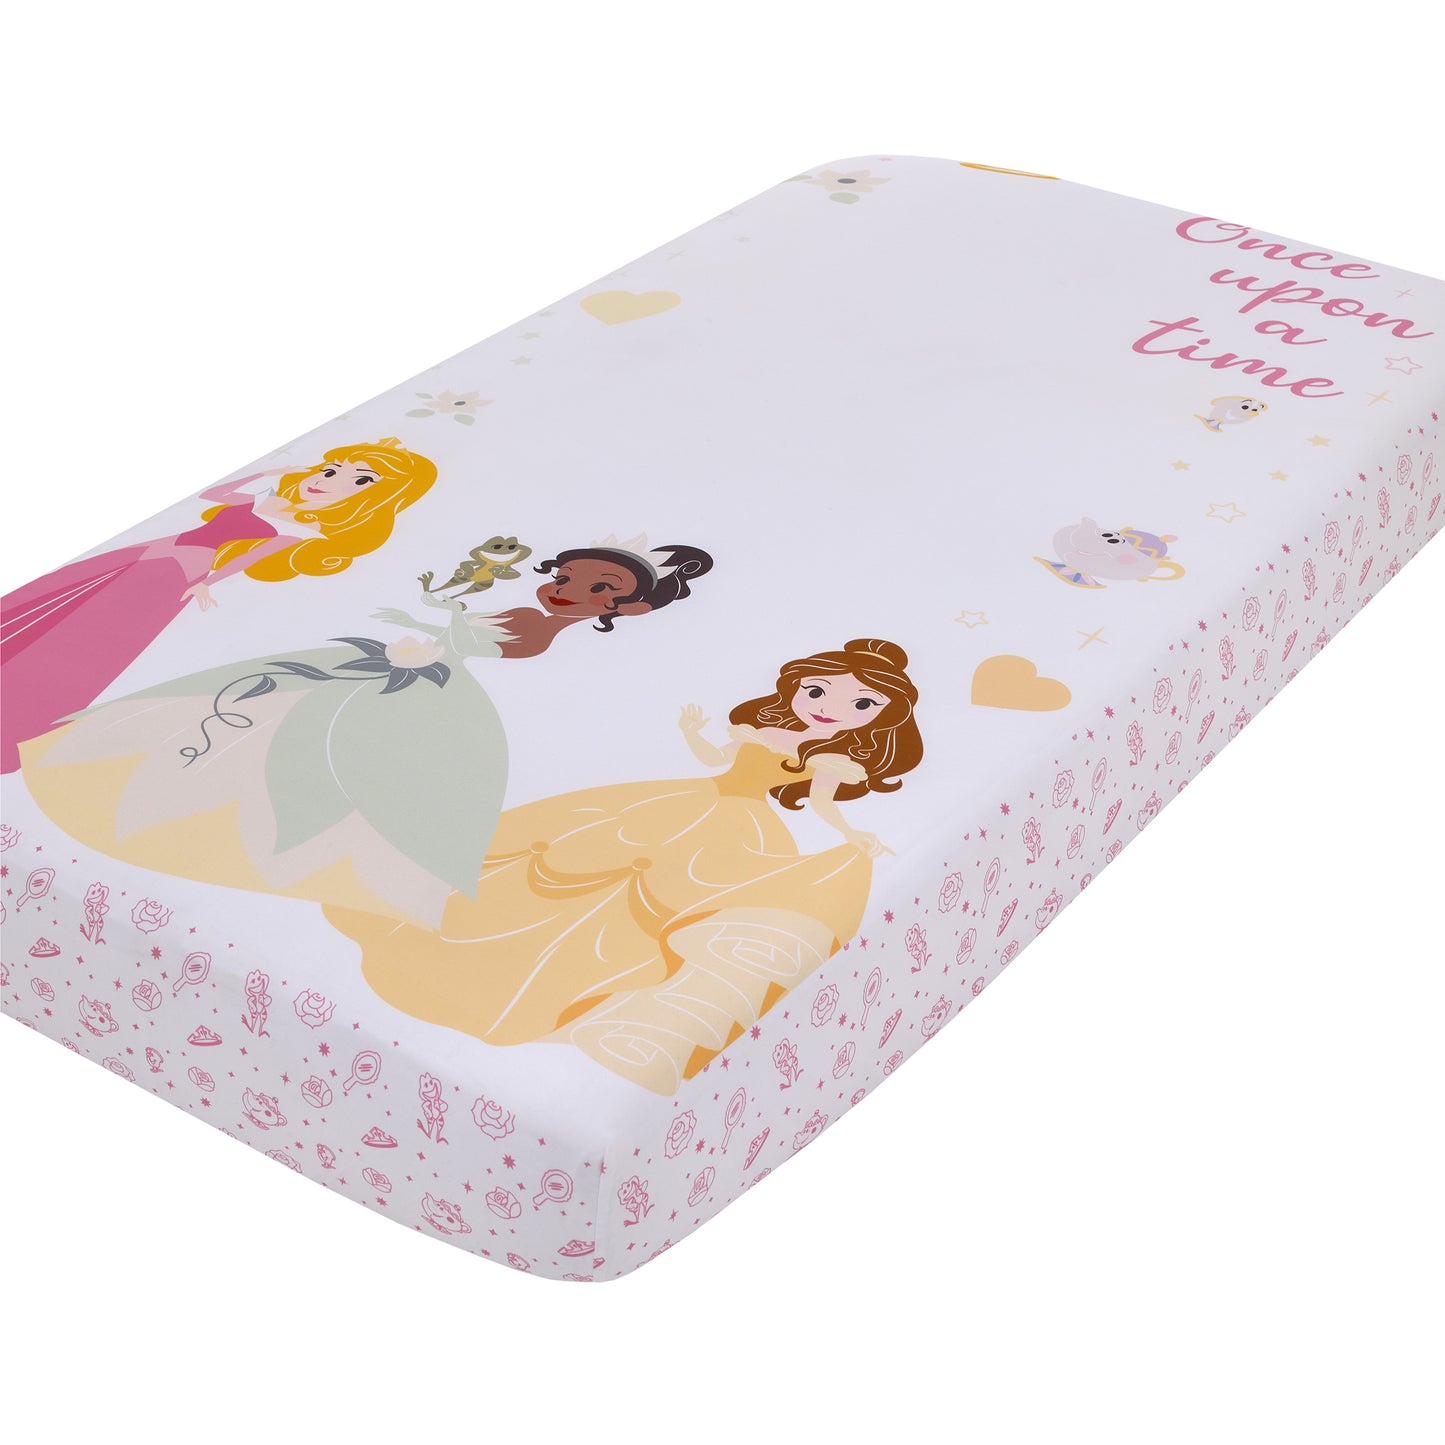 Disney Princess Make A Wish Pink, White and Yellow "Once Upon a Time" Nursery Photo Op Fitted Crib Sheet